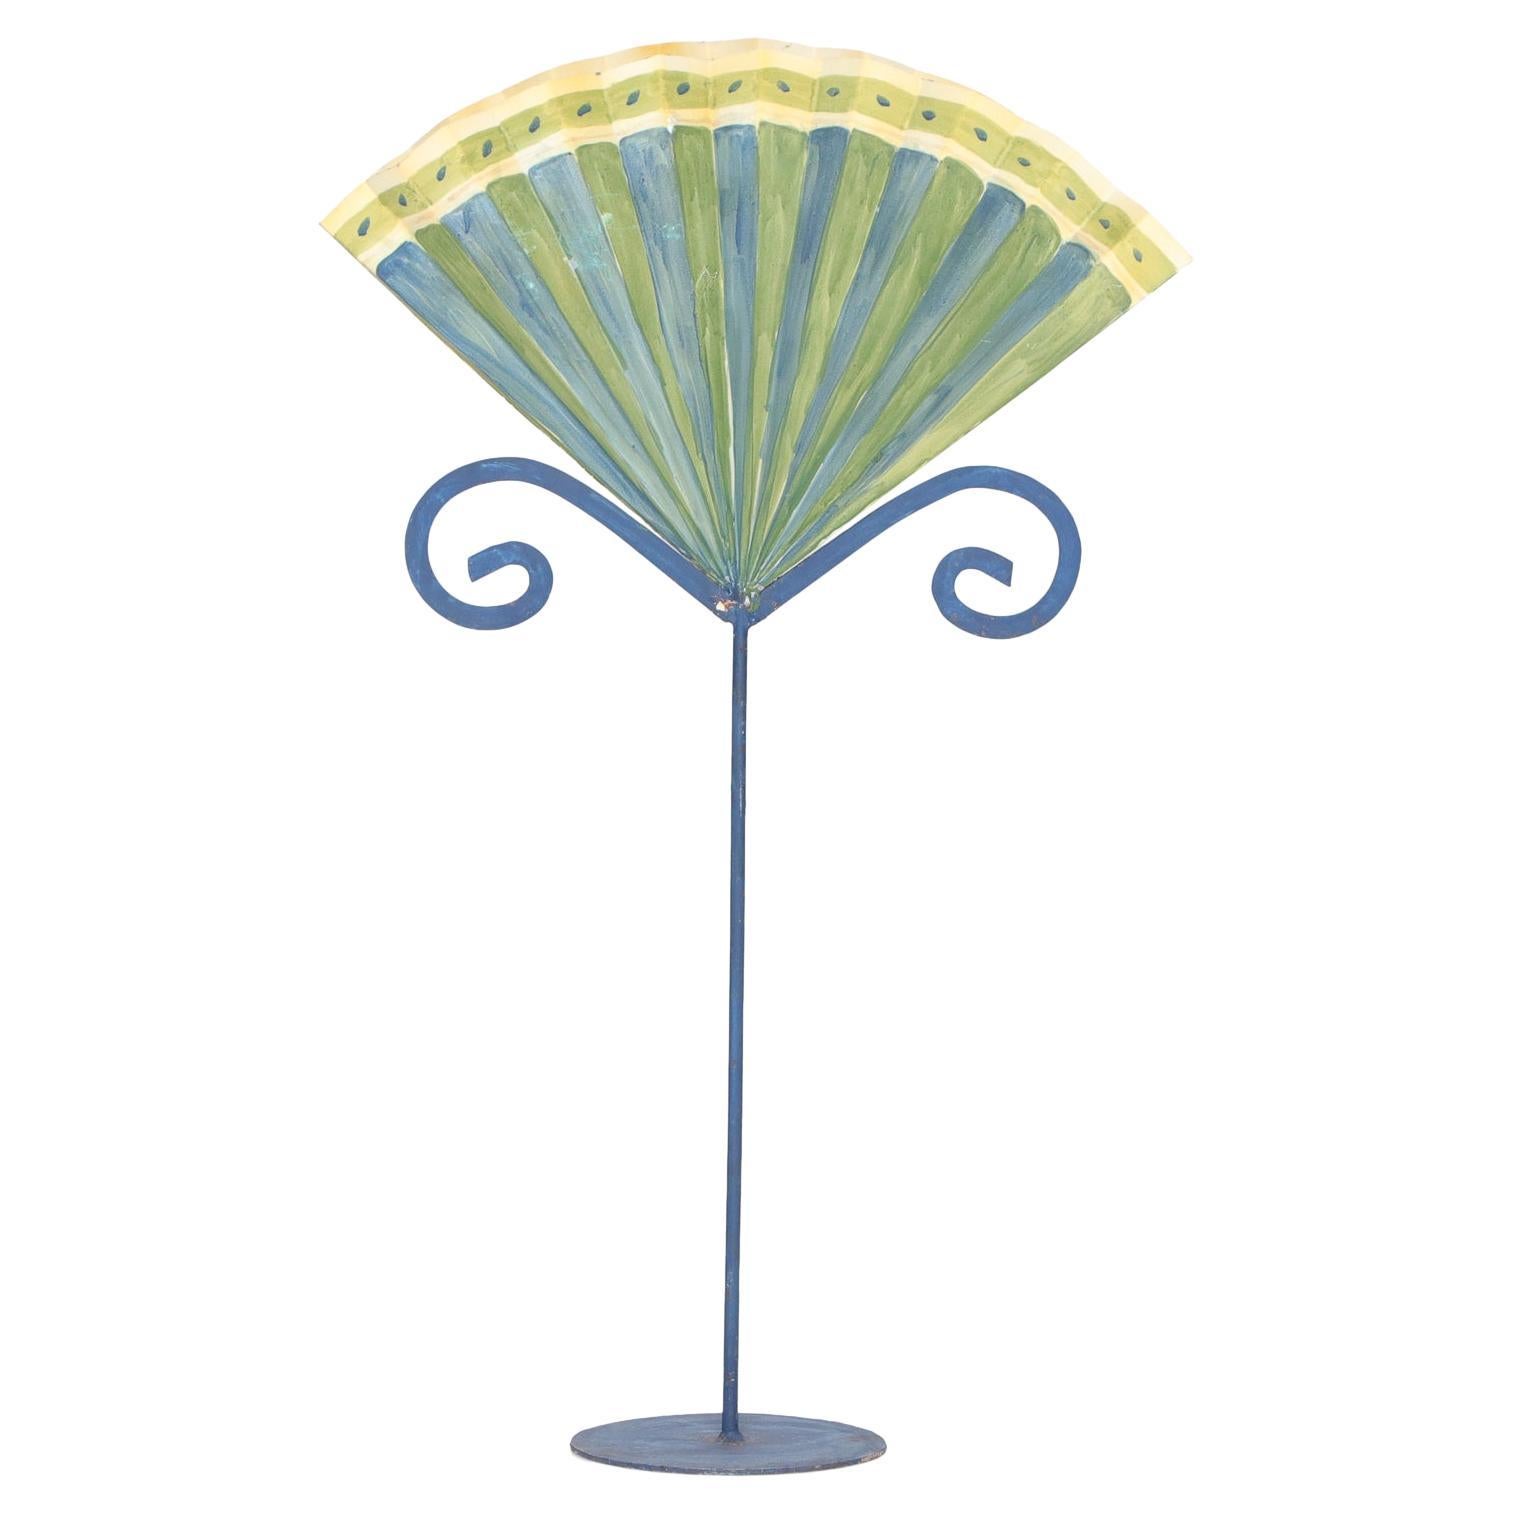 Painted Zinc Fan Formed Flower Stand For Sale